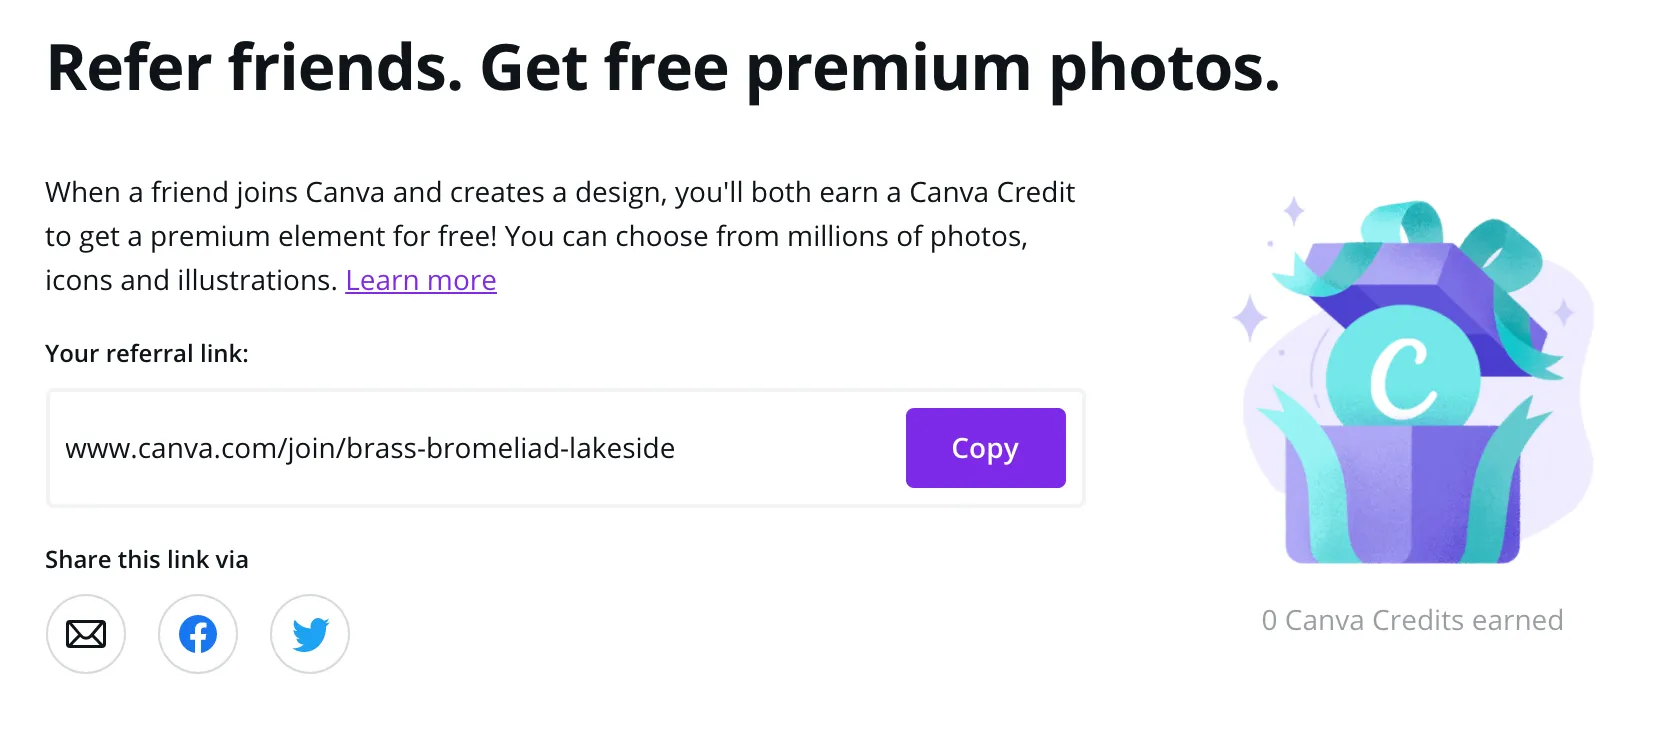 This is a screenshot of Canva's referral landing page. The page includes text explaining how the referral program works. There is a section with a purple button that allows users to copy their referral link. Below this section, there are social media icons, including an email icon, Facebook icon, and Twitter icon, which users can use to share the link. On the right side of the page, there is a purple gift box with a turquoise ribbon and an invitation to join Canva. The Canva logo, represented by the letter "C," is coming out of the gift box. This is a great example of how to design a SaaS referral landing page.